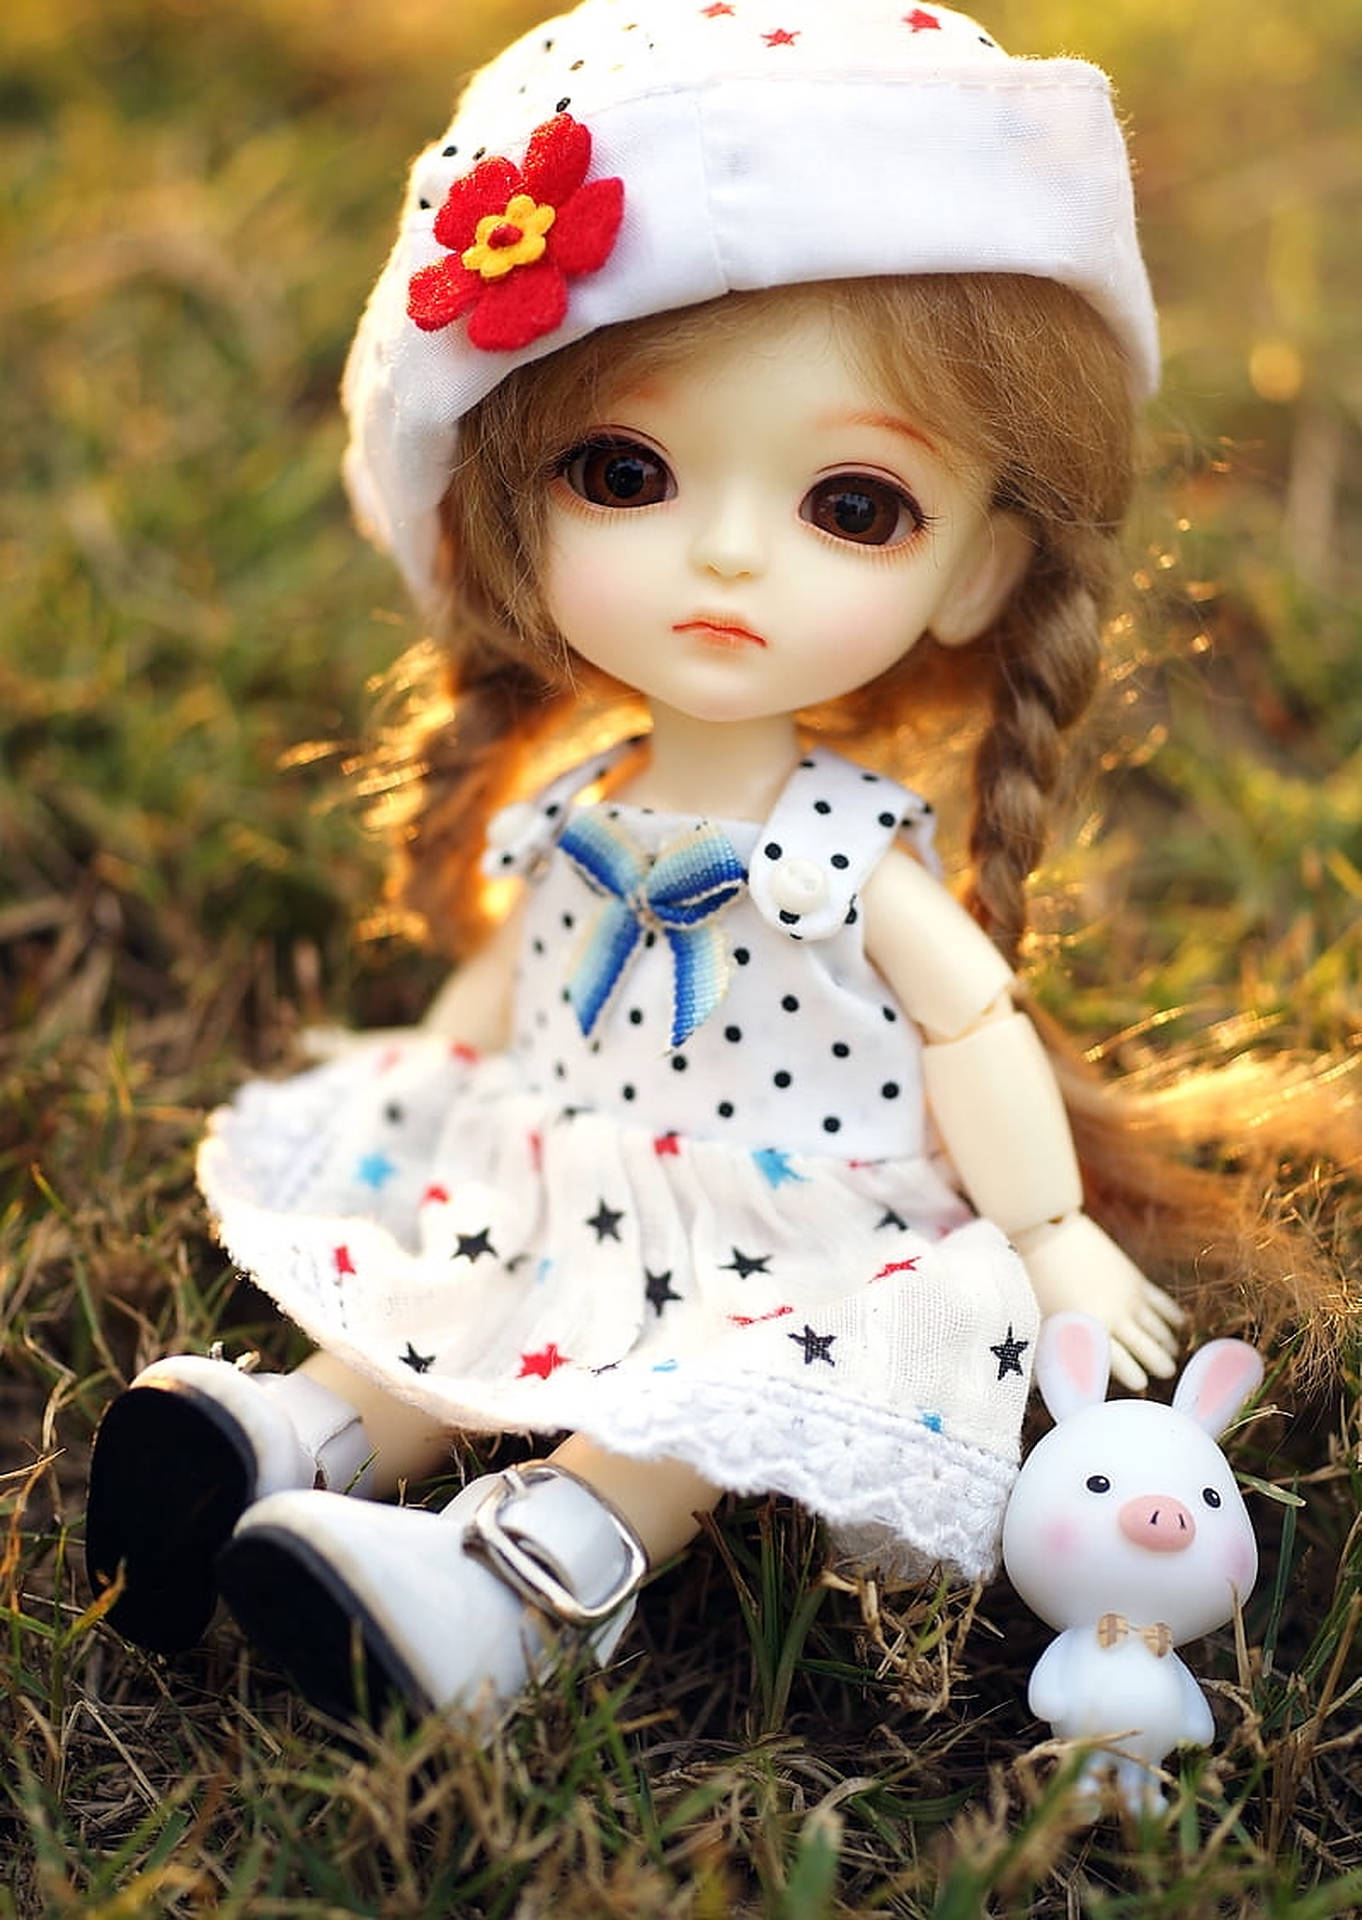 Download Cute Doll With Piggy Toy Wallpaper 